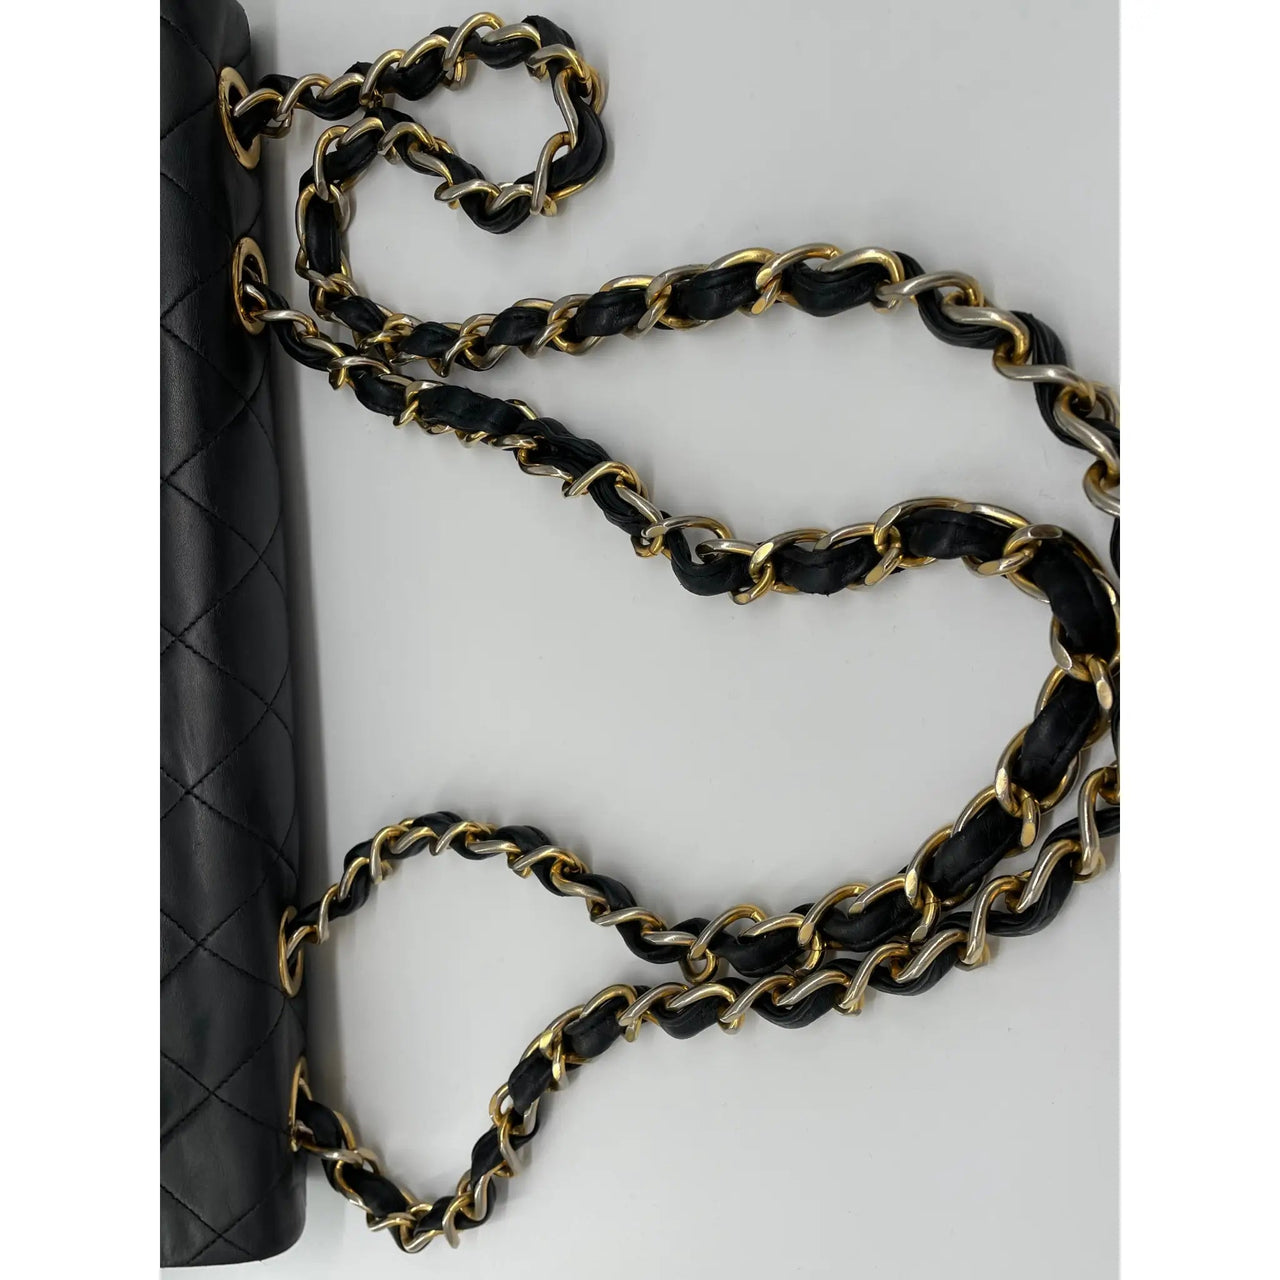 Chanel Vintage Chanel Black Quilted Lambskin Leather Chain